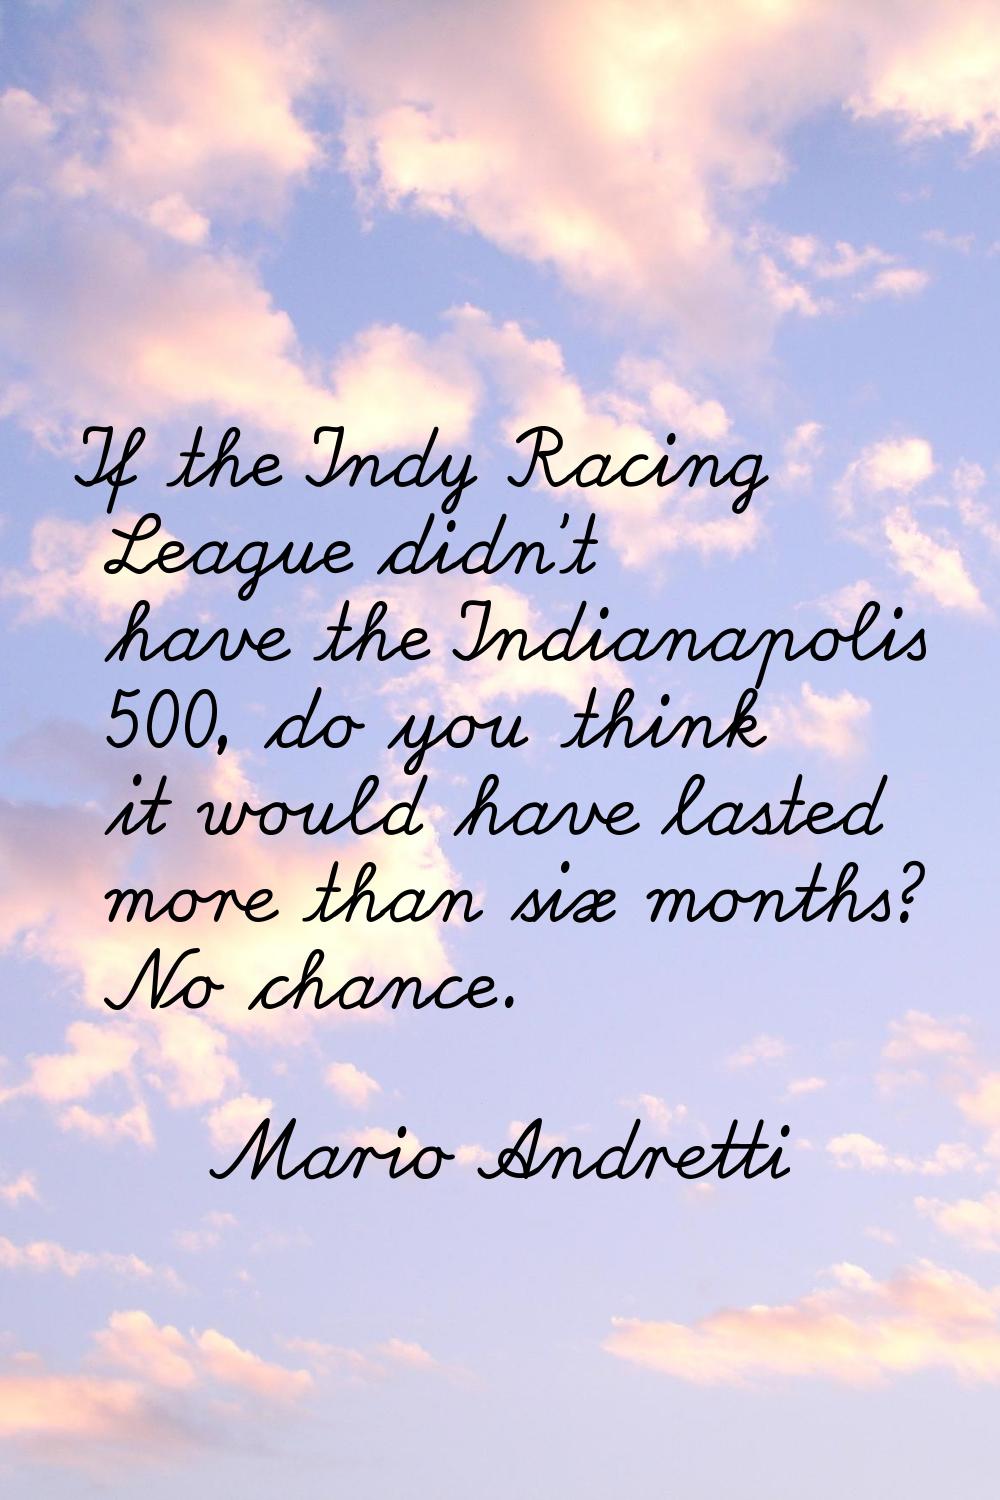 If the Indy Racing League didn't have the Indianapolis 500, do you think it would have lasted more 